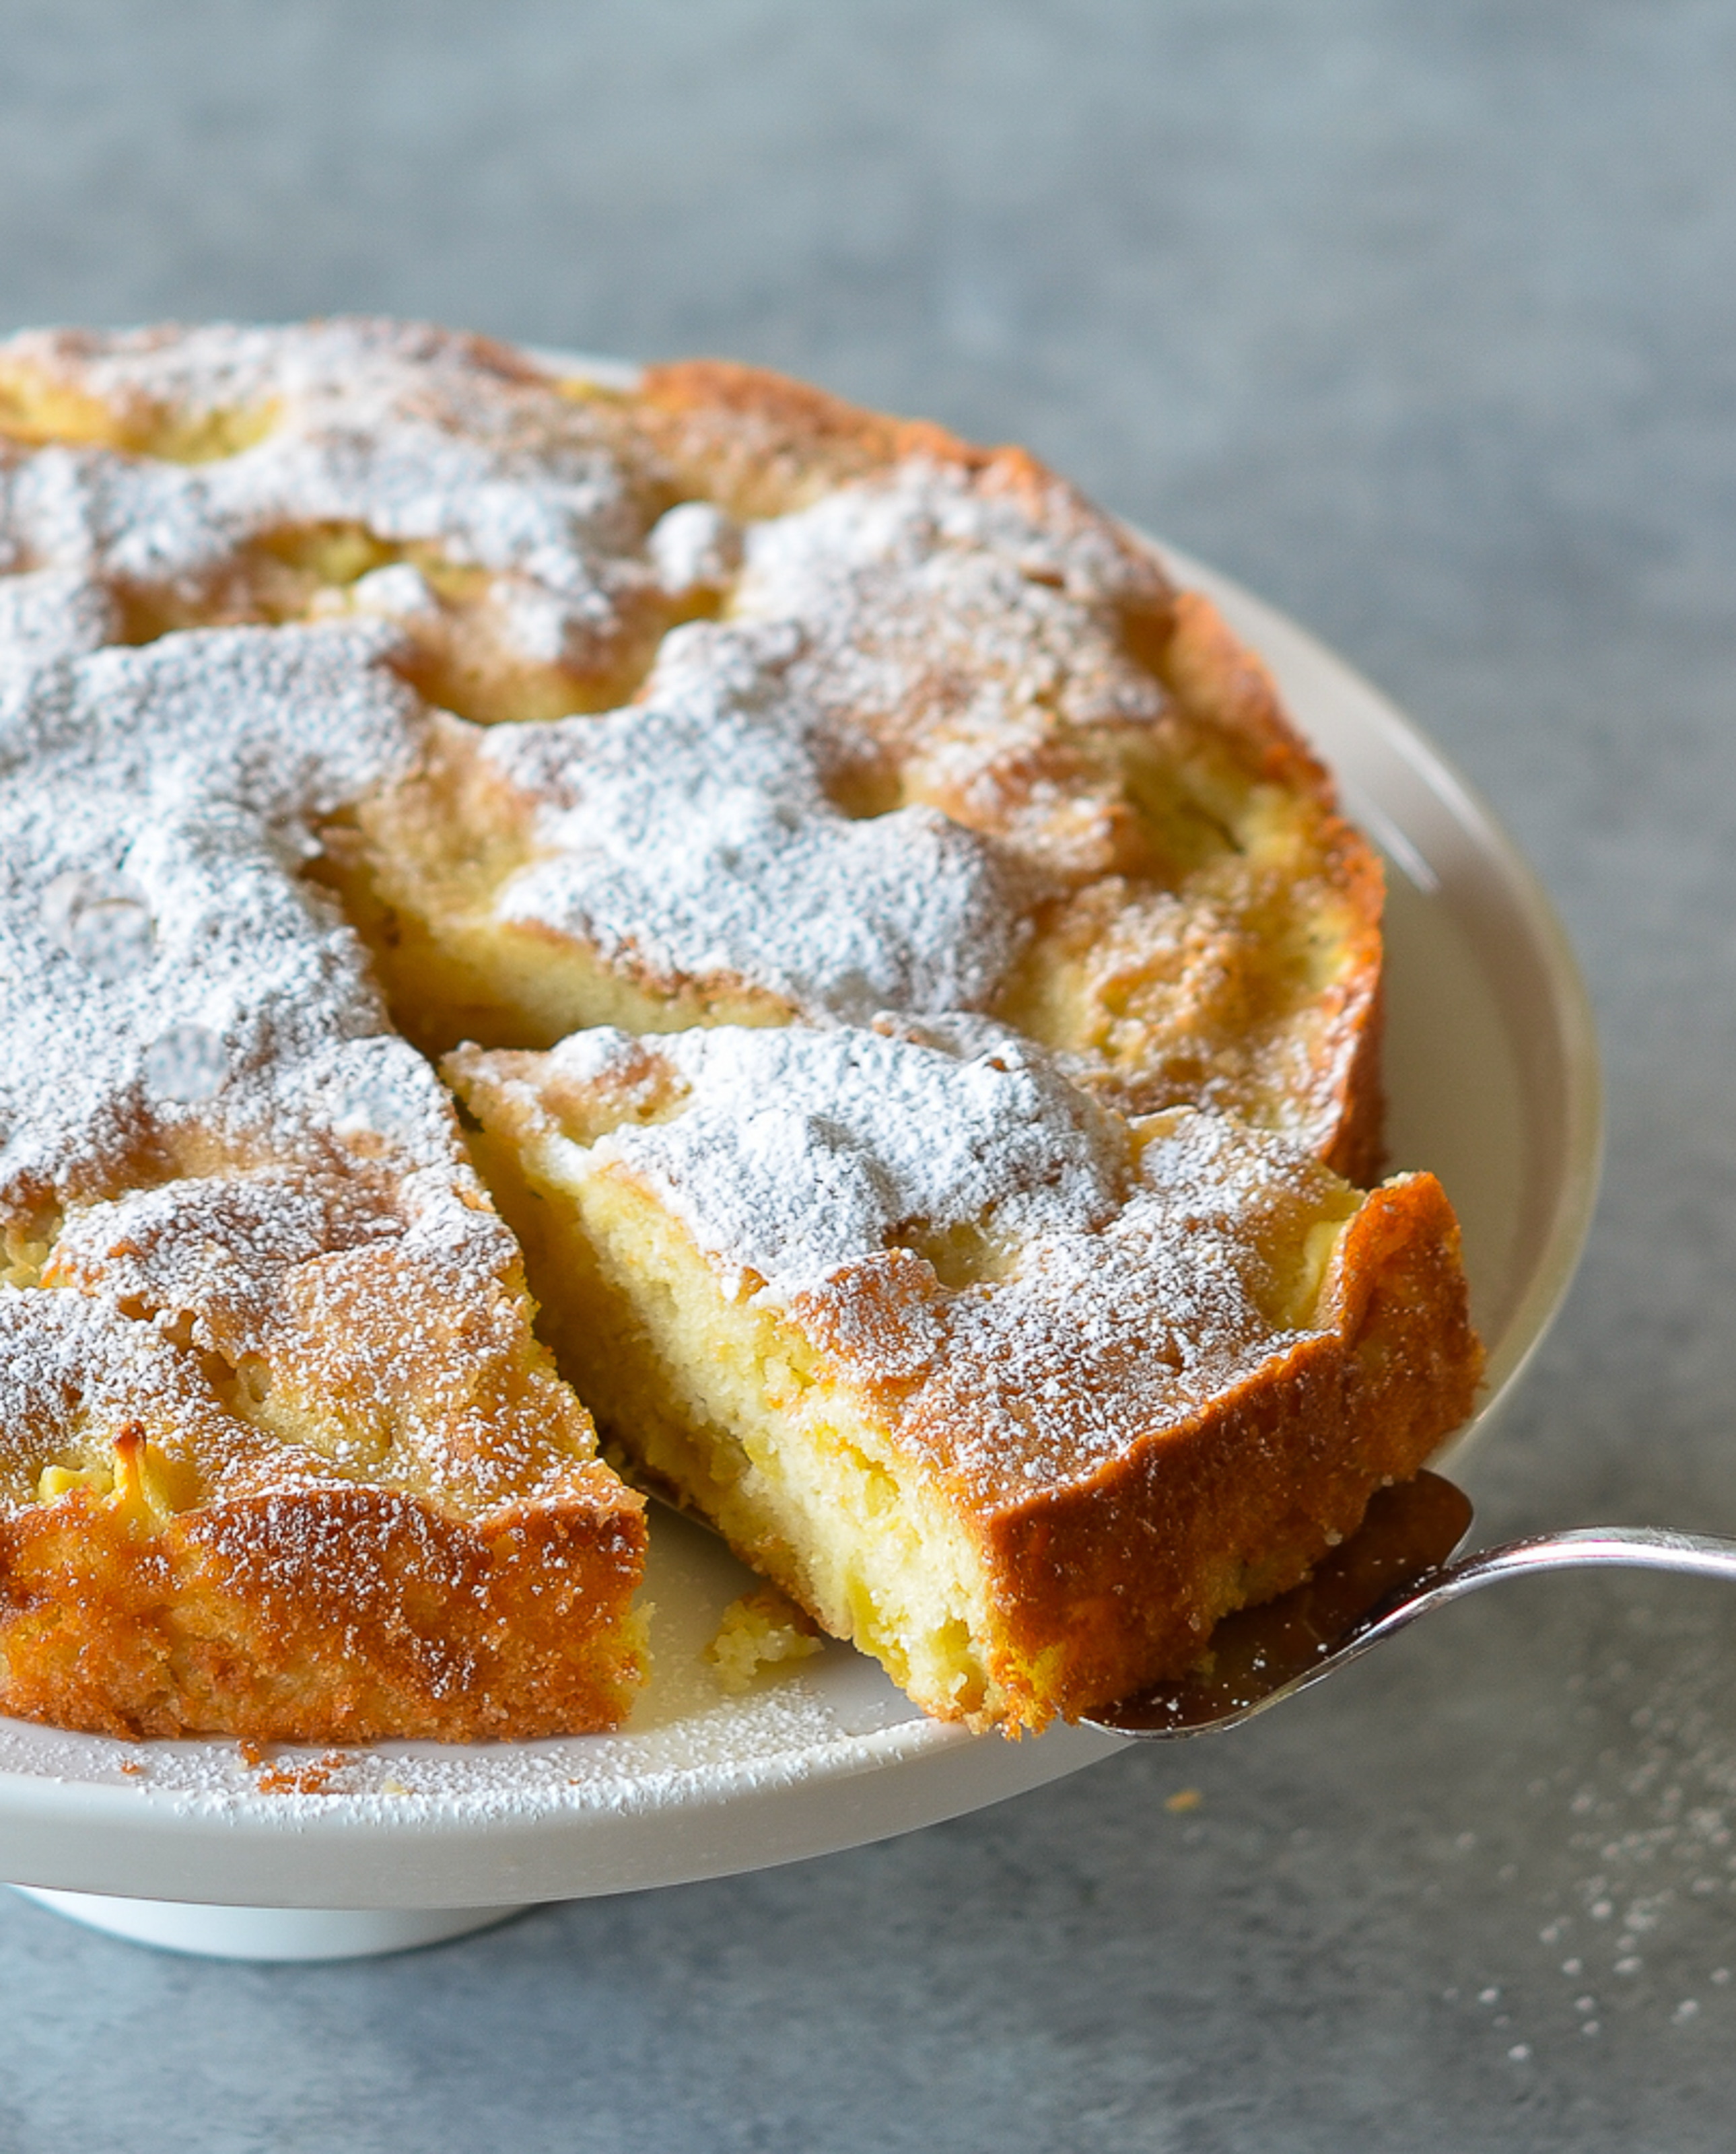 14 Springform Pan Recipes for More Than Cakes